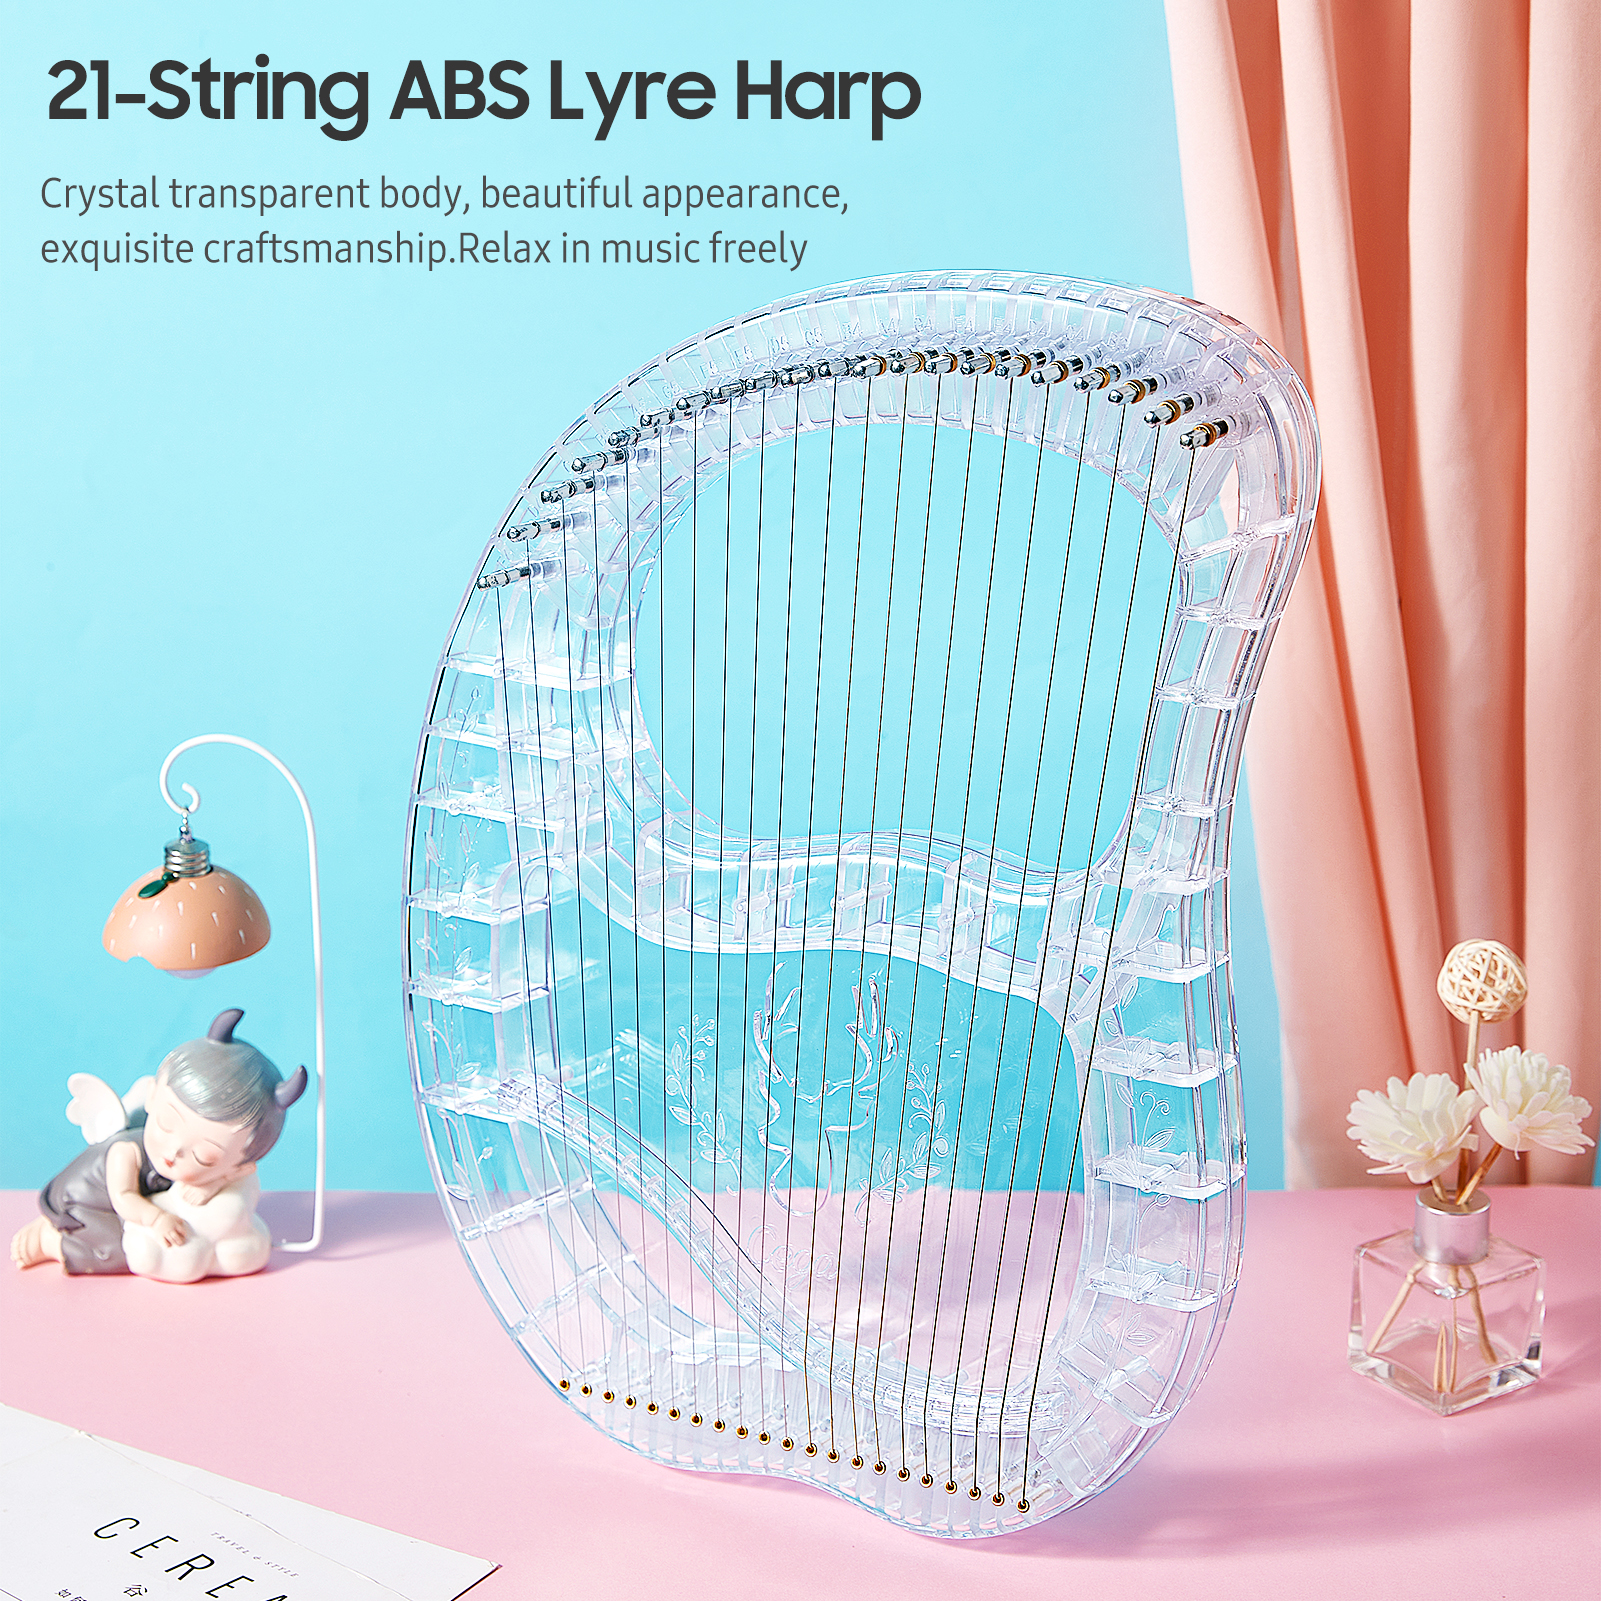 21 String Lyre Harp ABS Transparent String Instrument with Portable EVA Bag/Tuning Key/Spare String 3D Anti- fall Body for Music Lovers Beginners Children Adults 